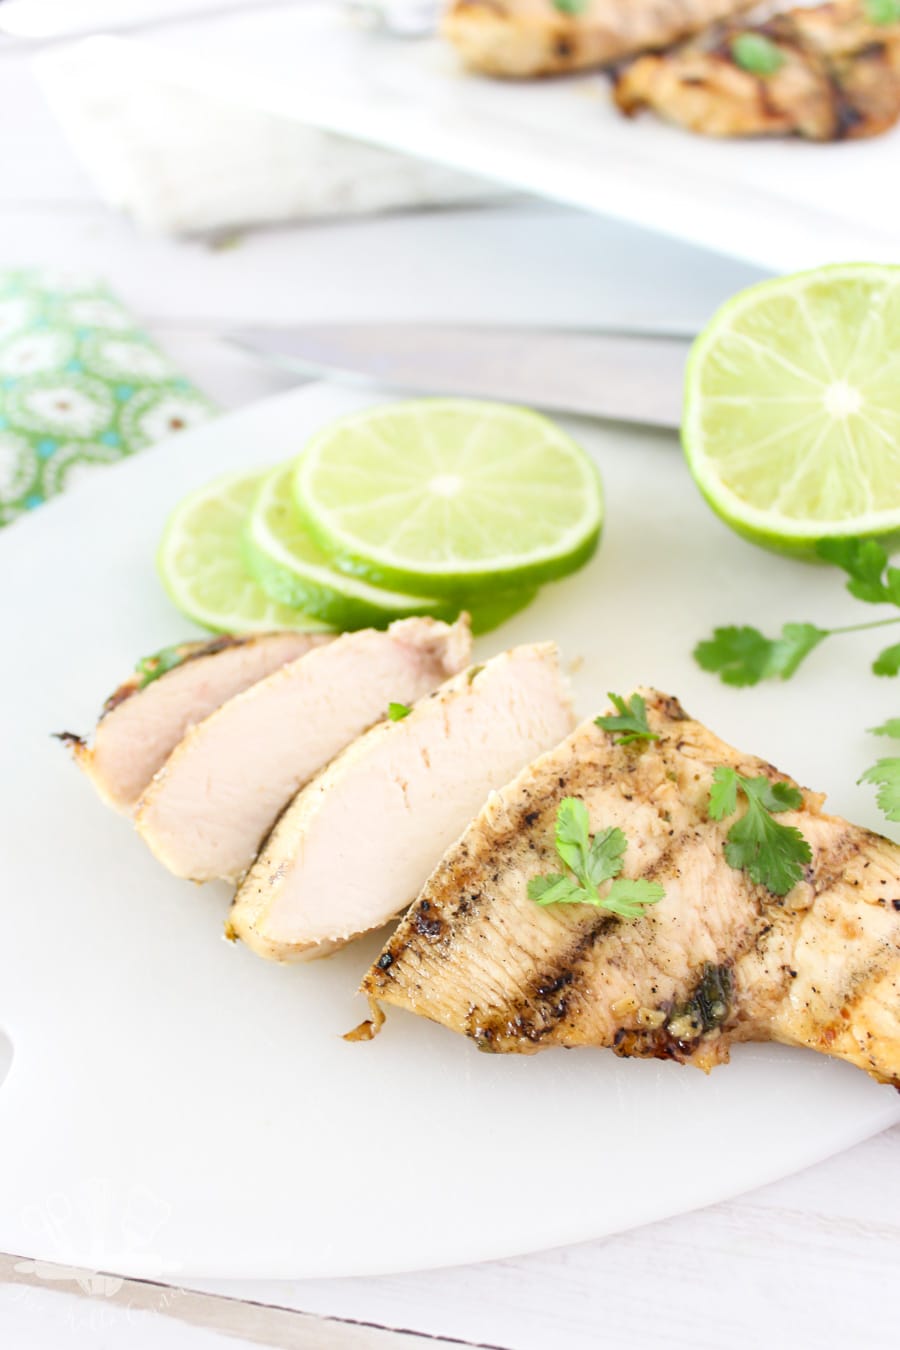 Easy 30 minute cilantro lime chicken marinade. Perfect for summer grilling!